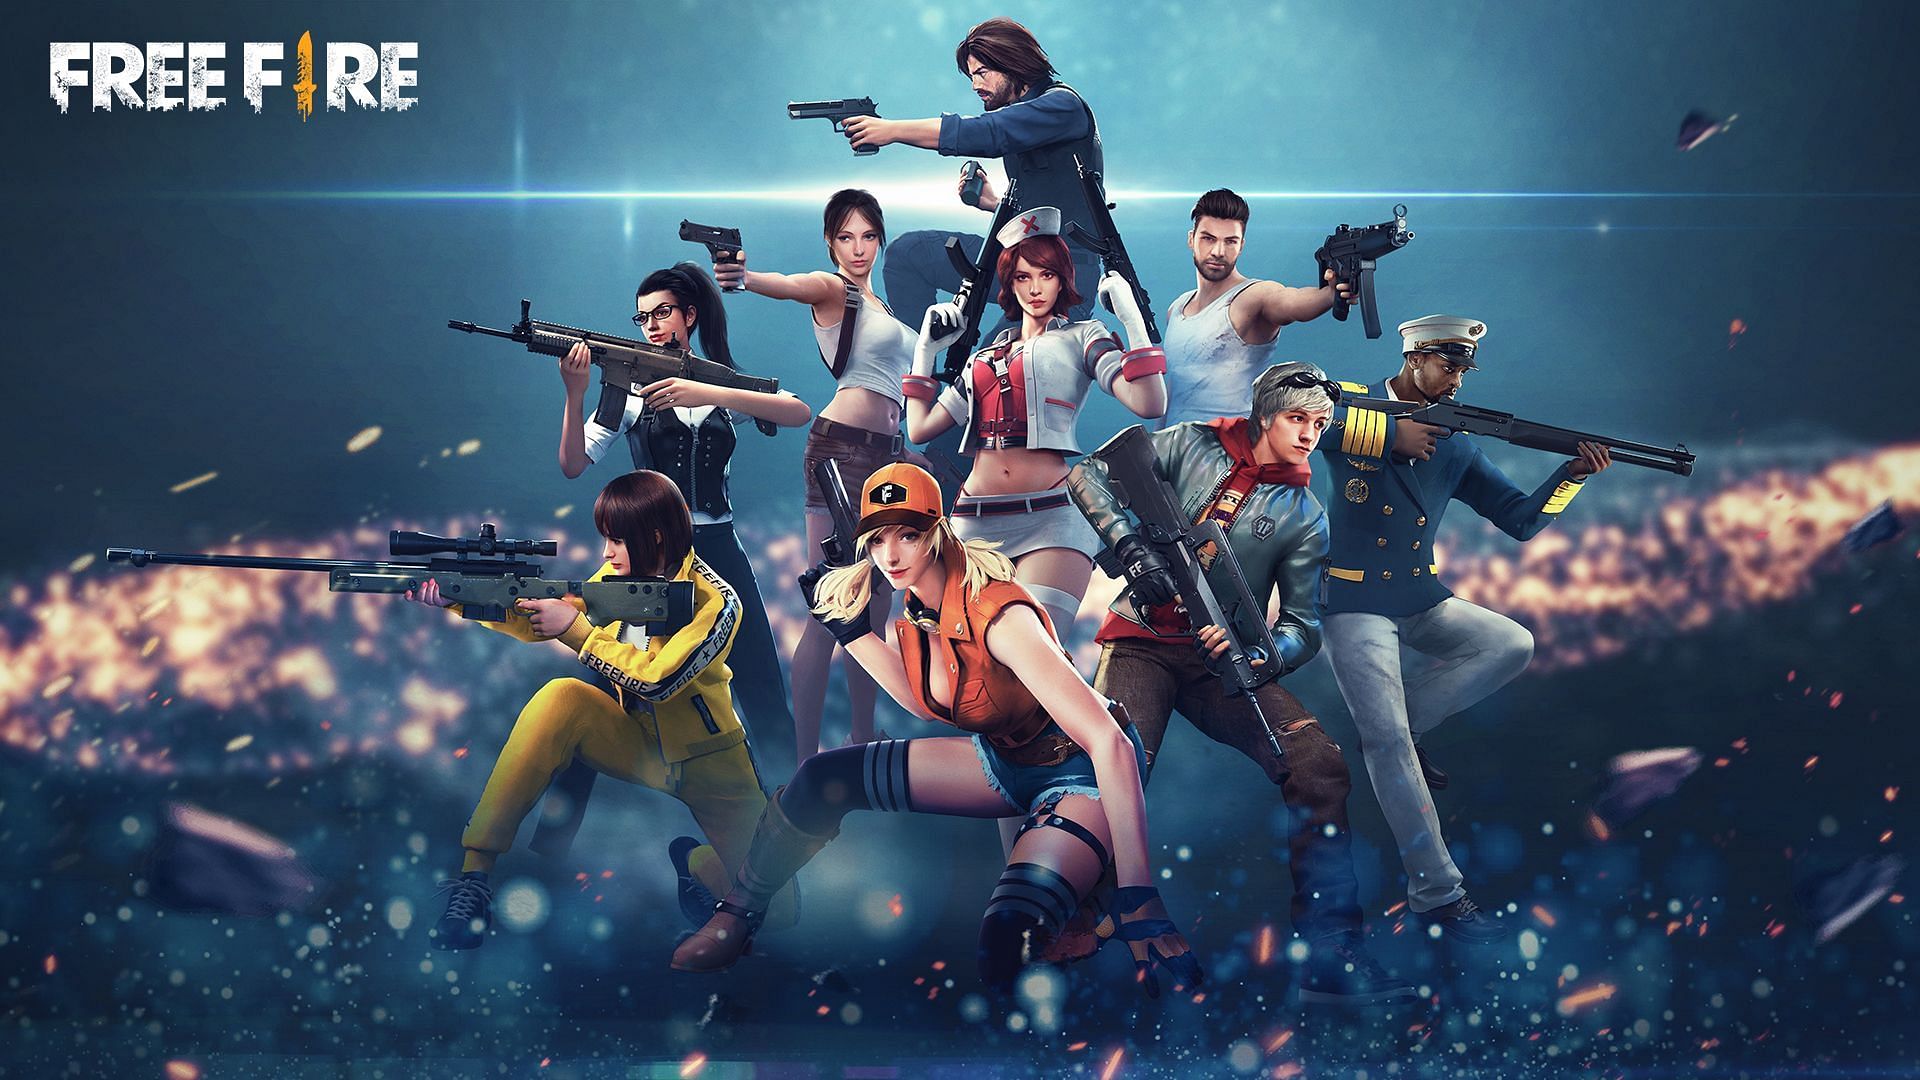 Free Fire was the most popular battle royale game in India in 2021 (Image via Garena)